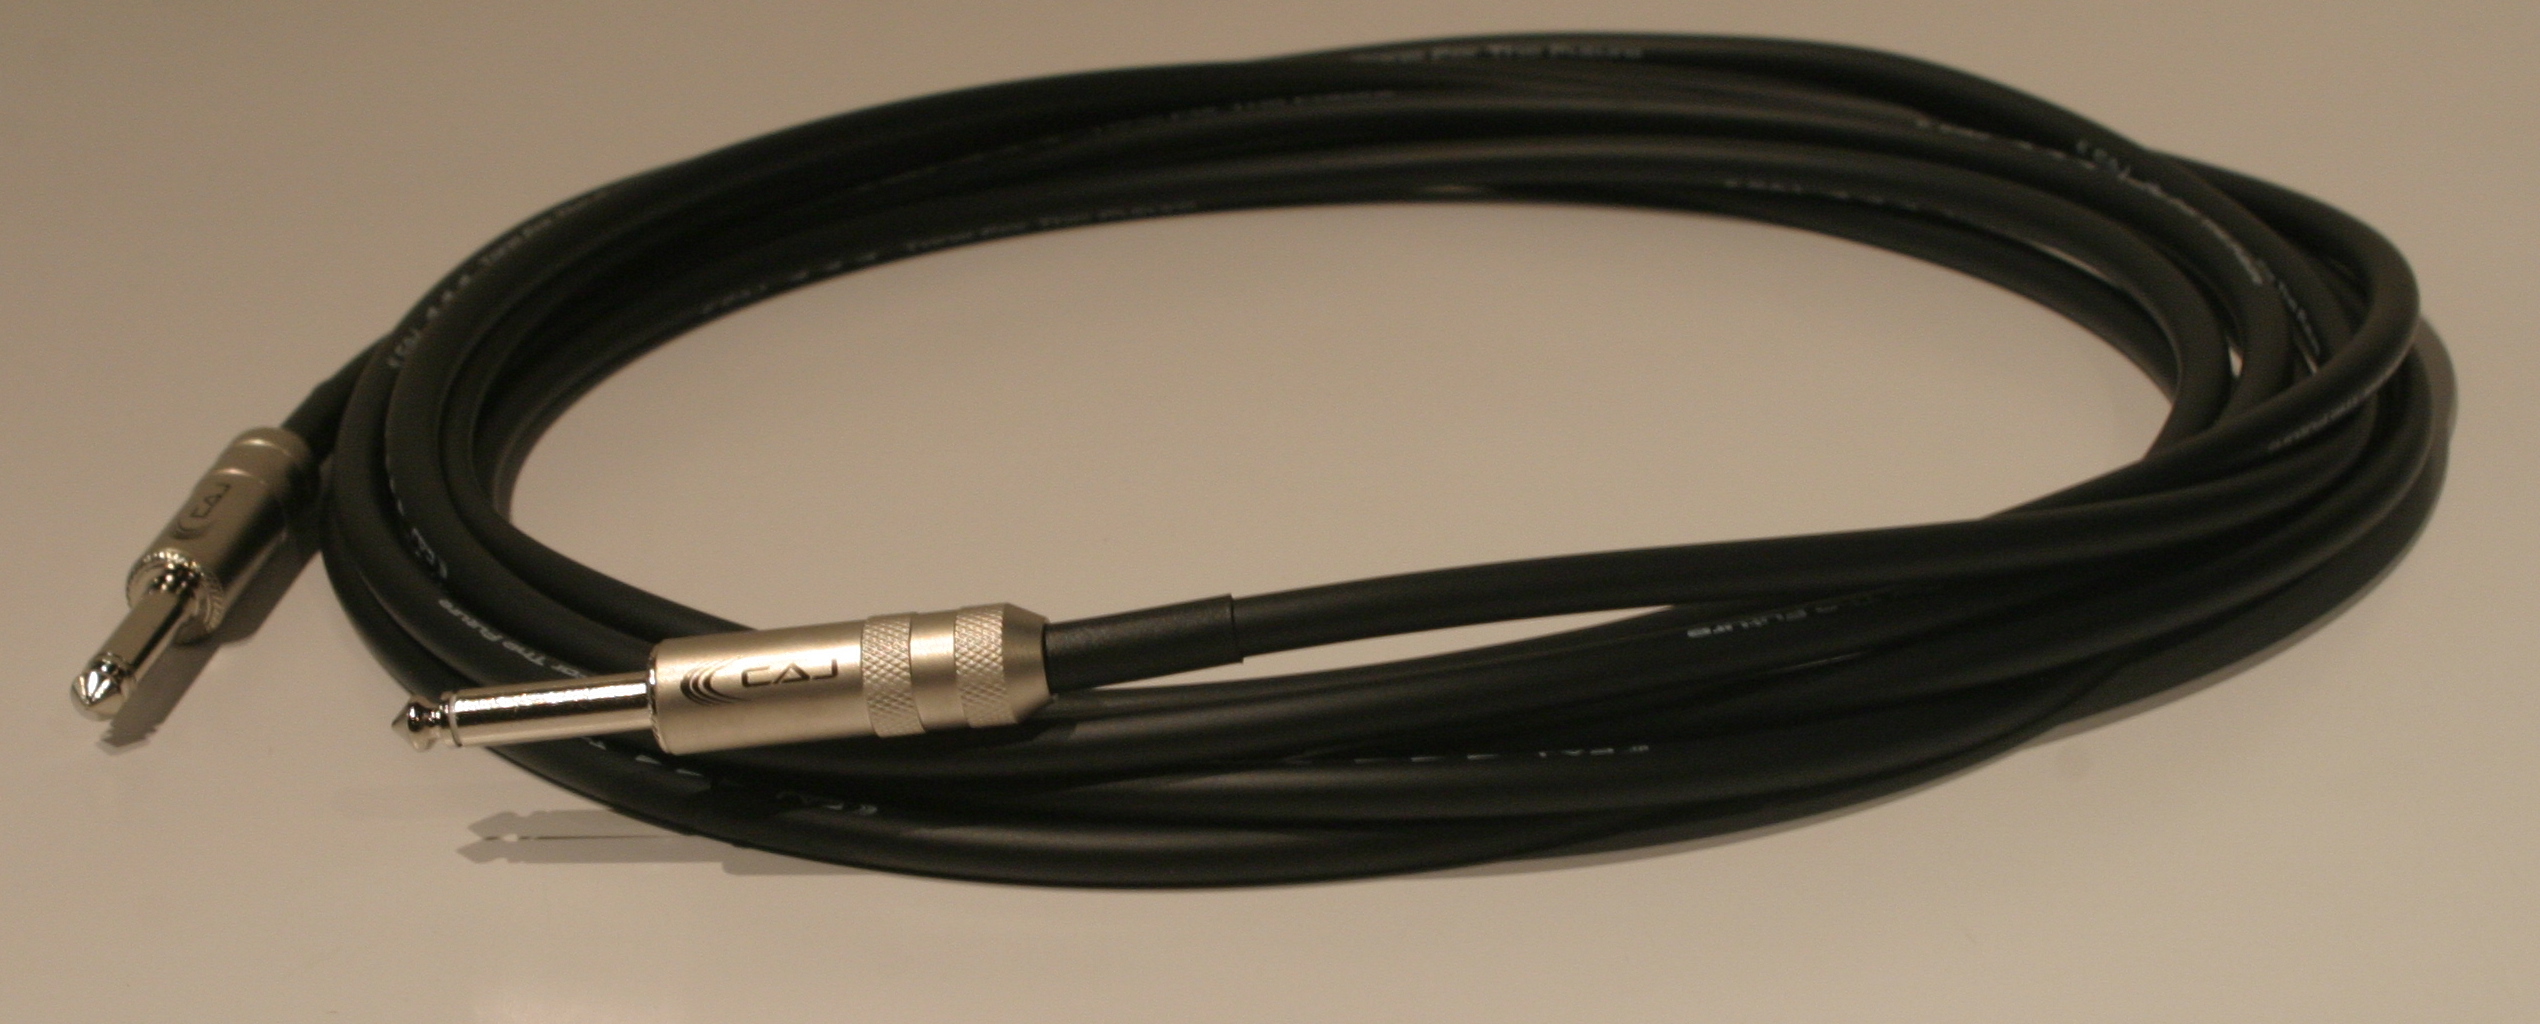 Guitar Cable / Patch Cable / TRS Cable